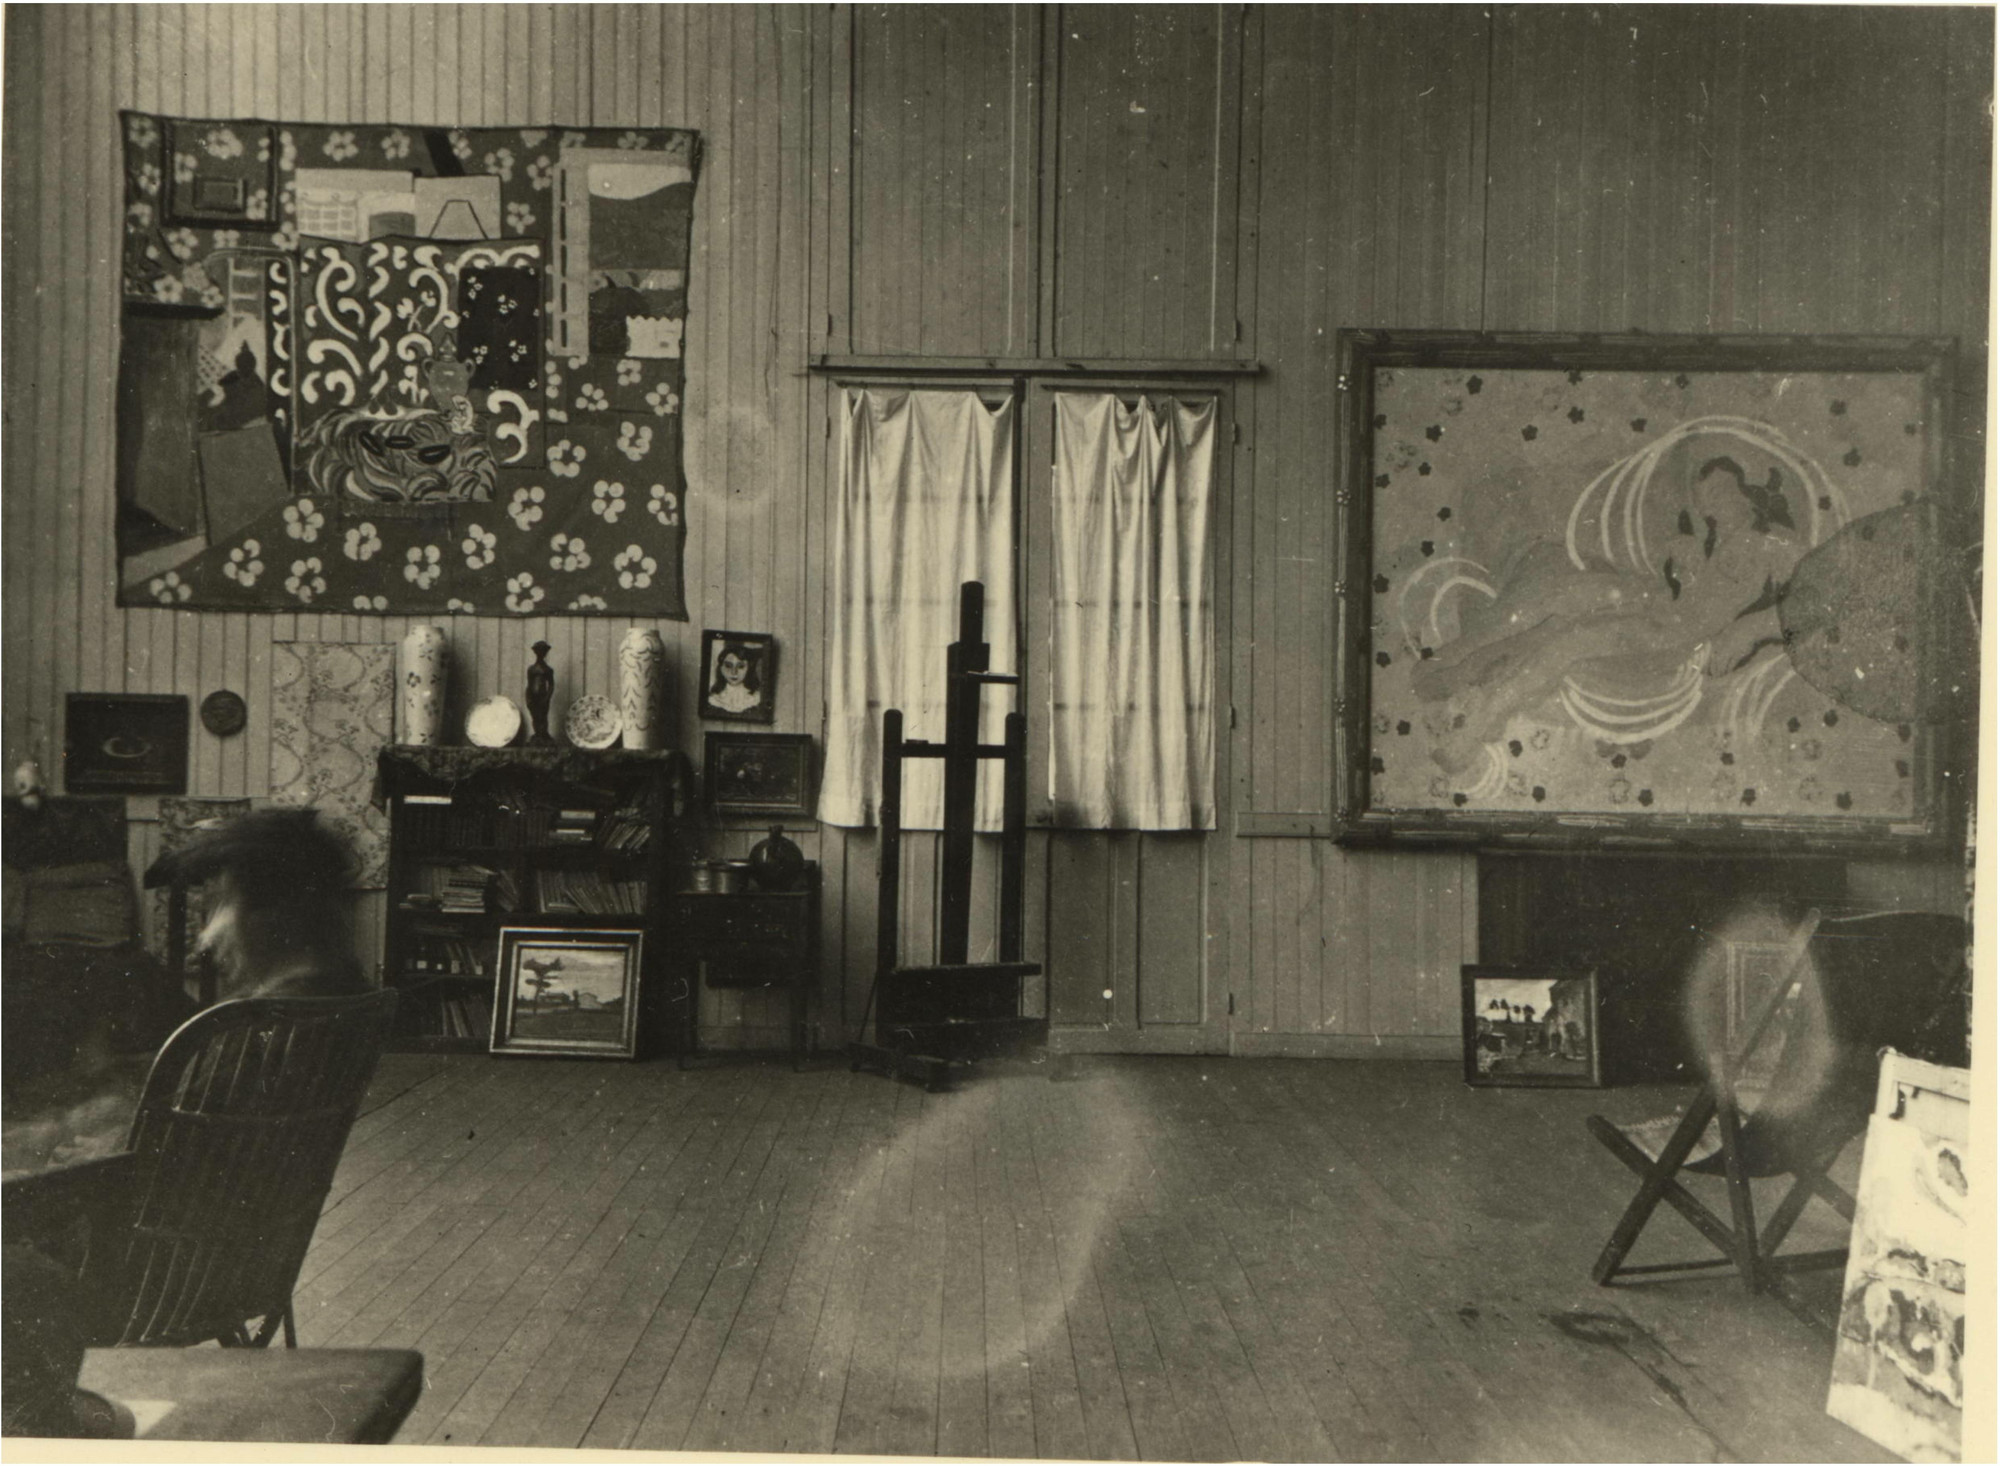 Photograph of Matisse’s studio, interior, Issy-les-Moulineaux, October/November 1911. 9 x 11.8 cm. Private collection